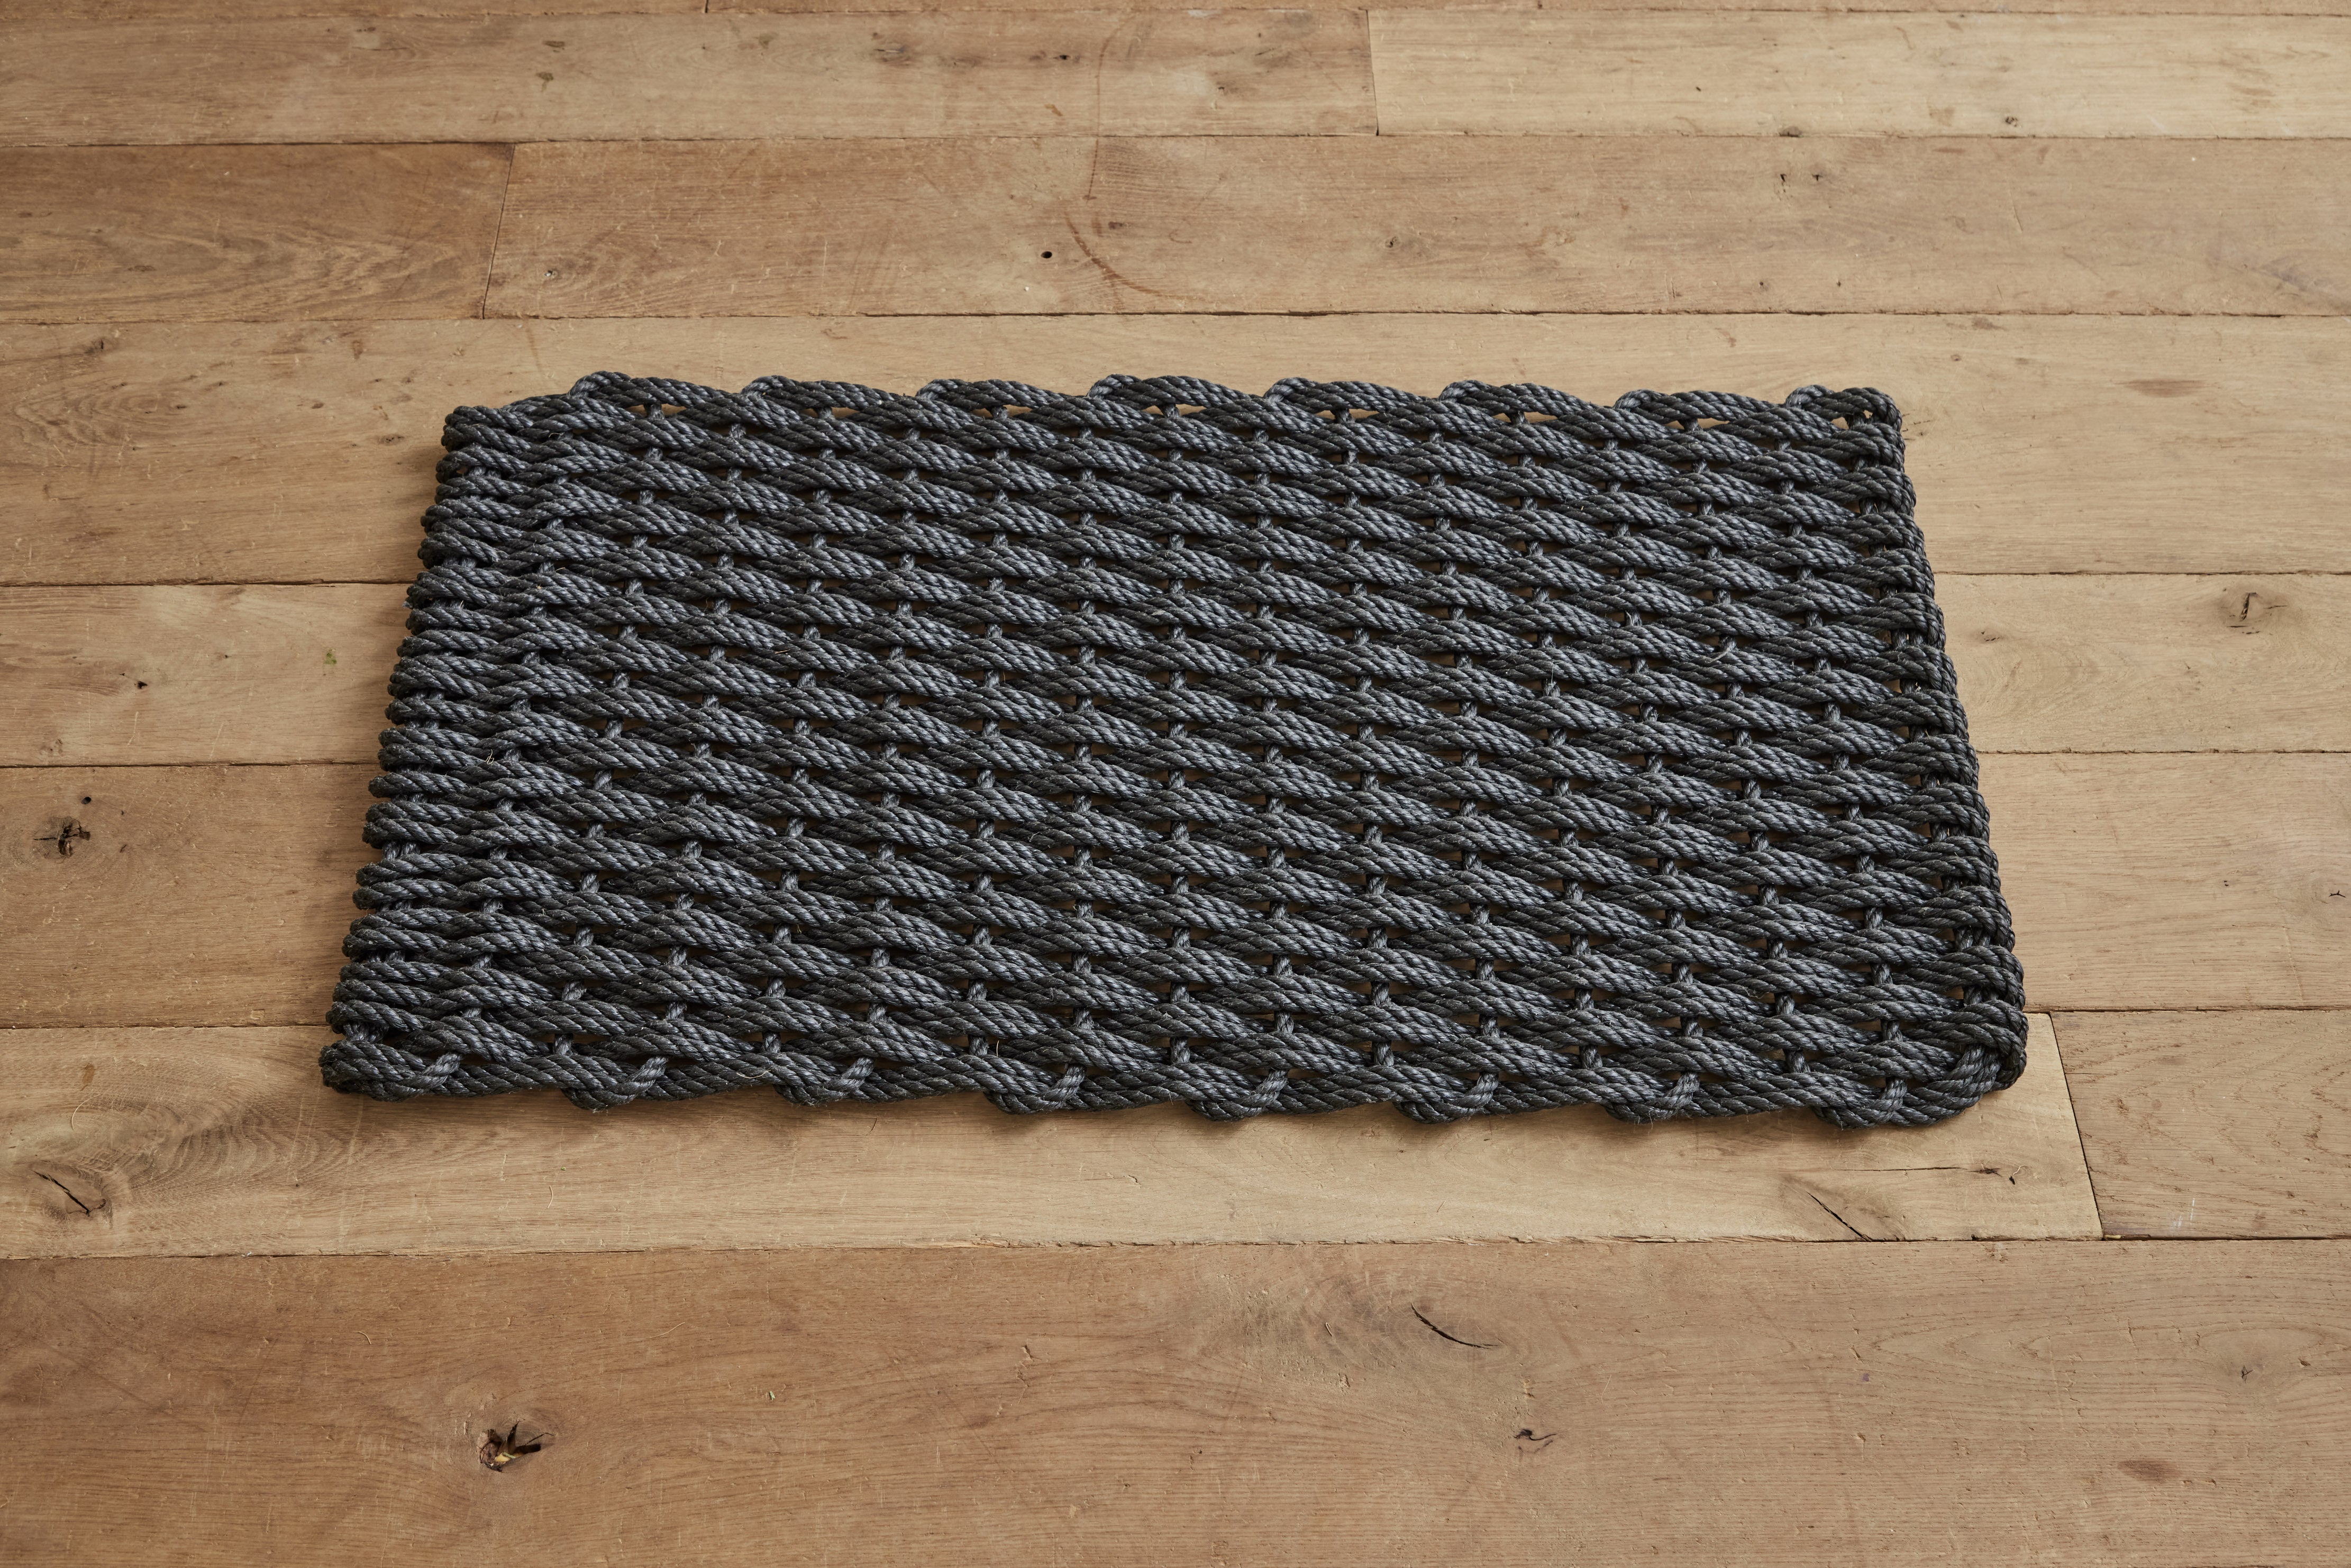 Woven Doormat Large in Charcoal